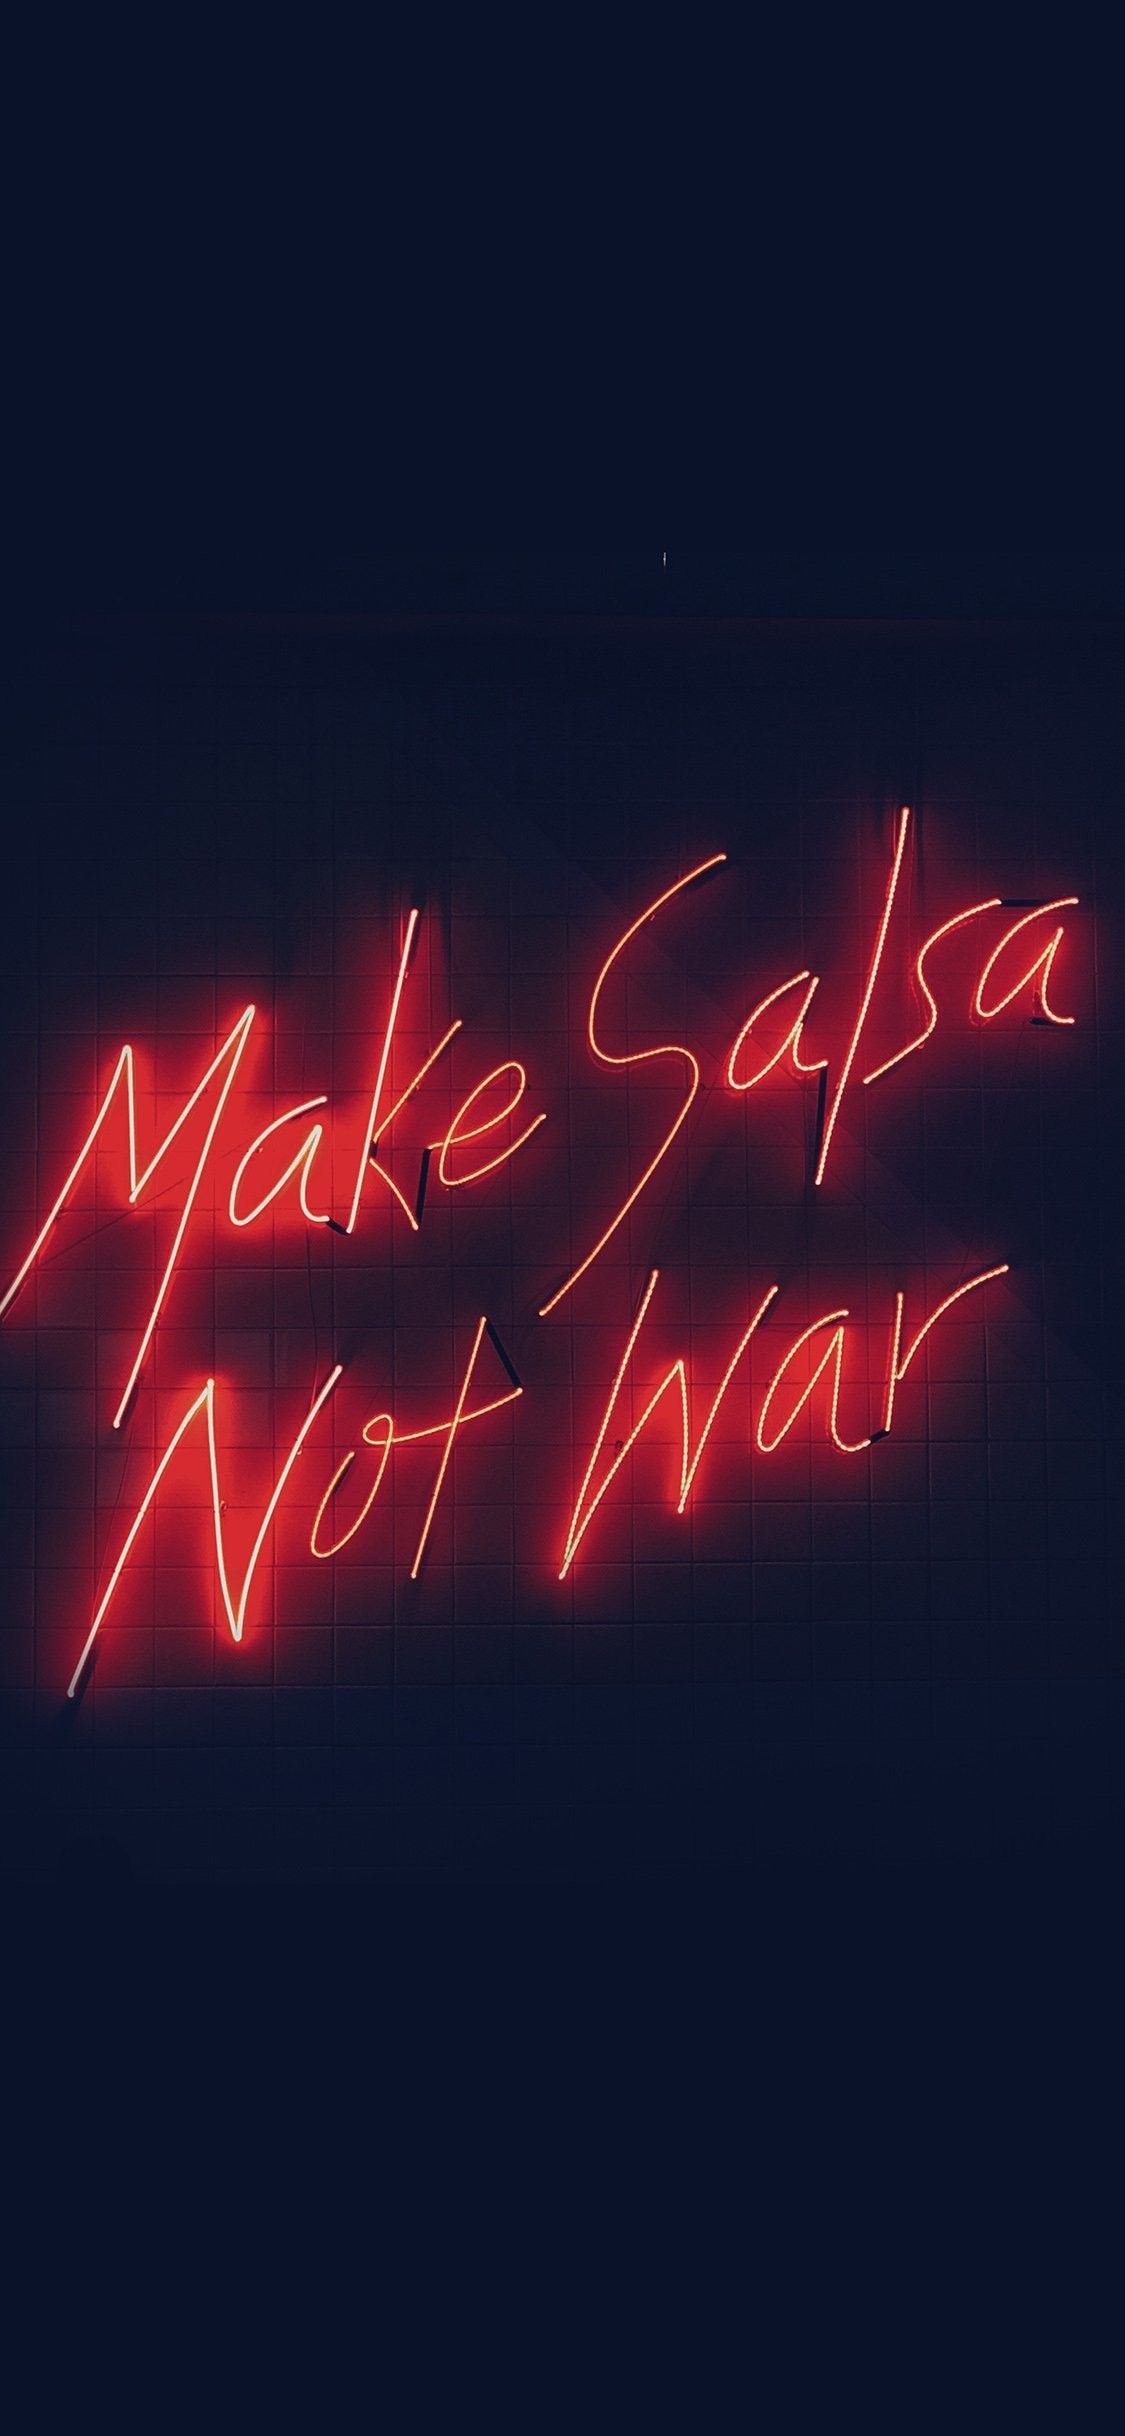 A neon sign that says make salsa not war - Neon red